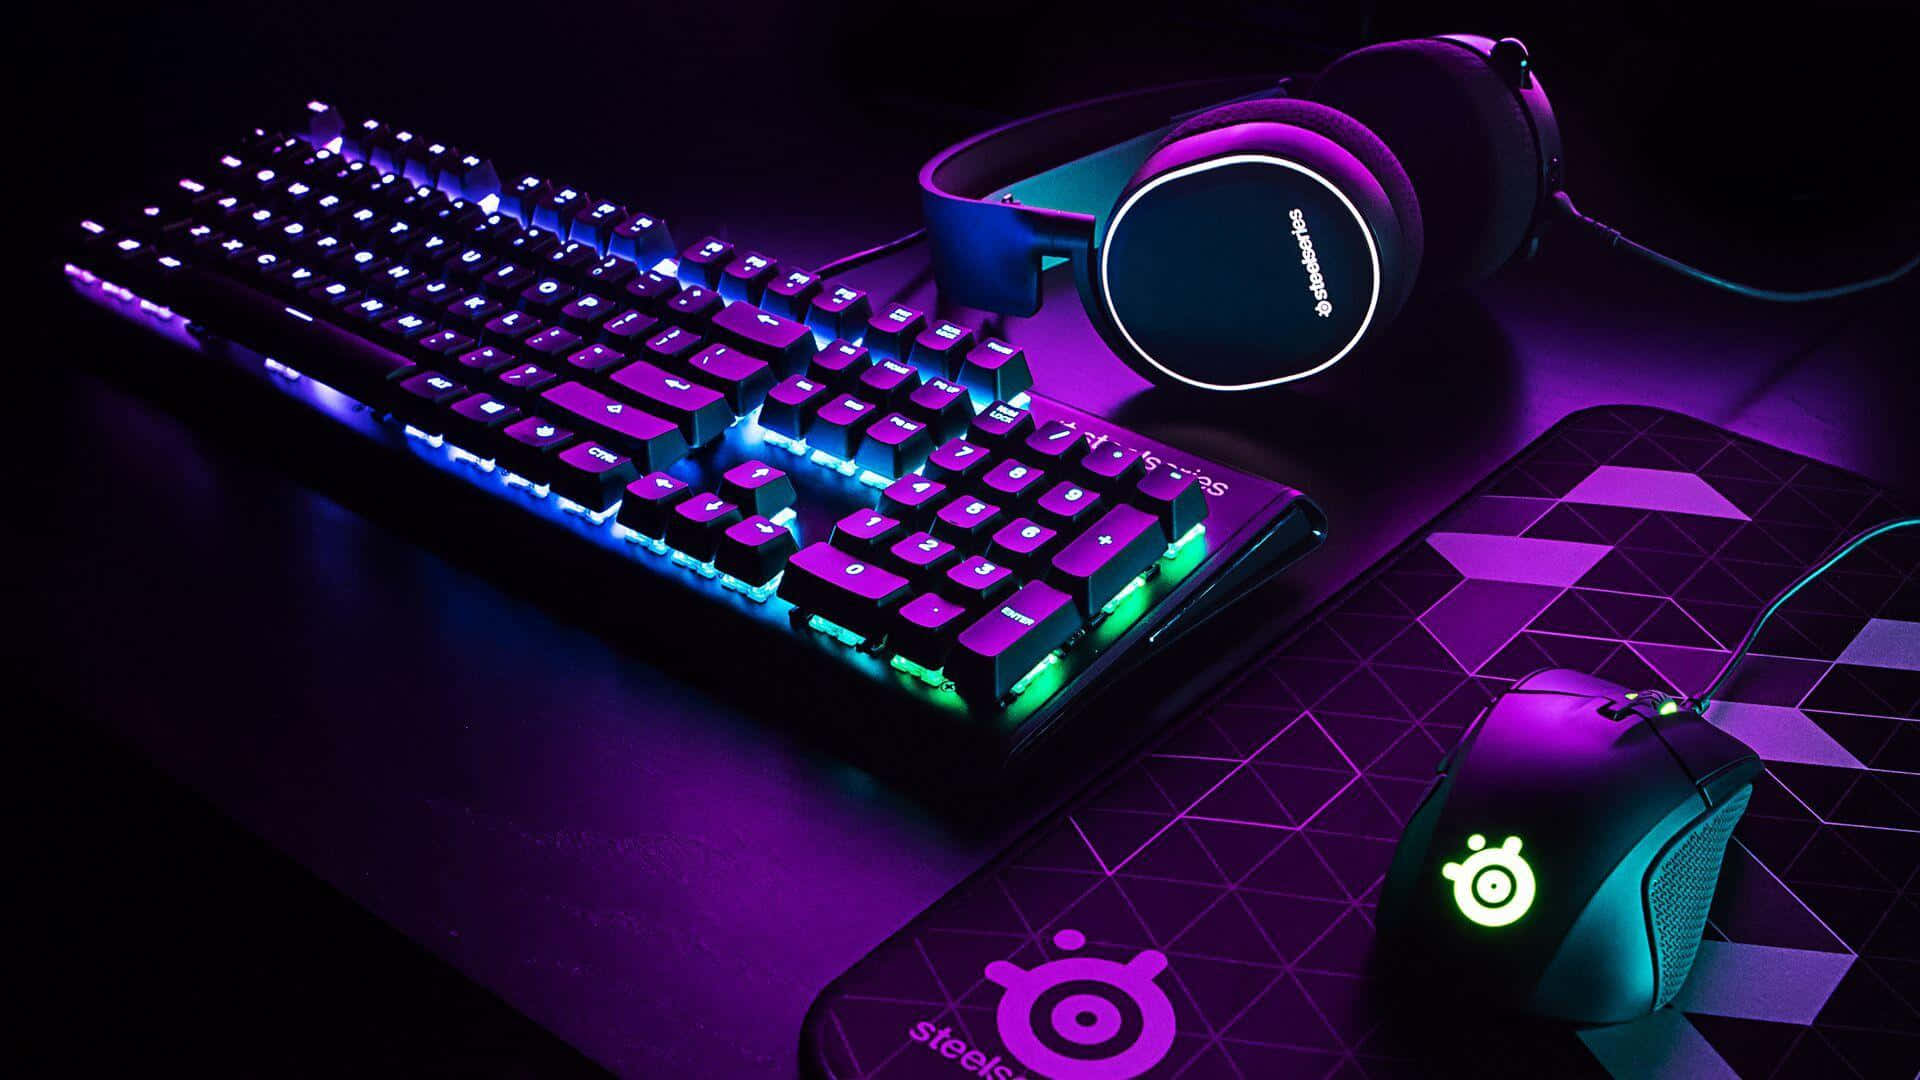 A Gaming Keyboard And Mouse With Purple Lights